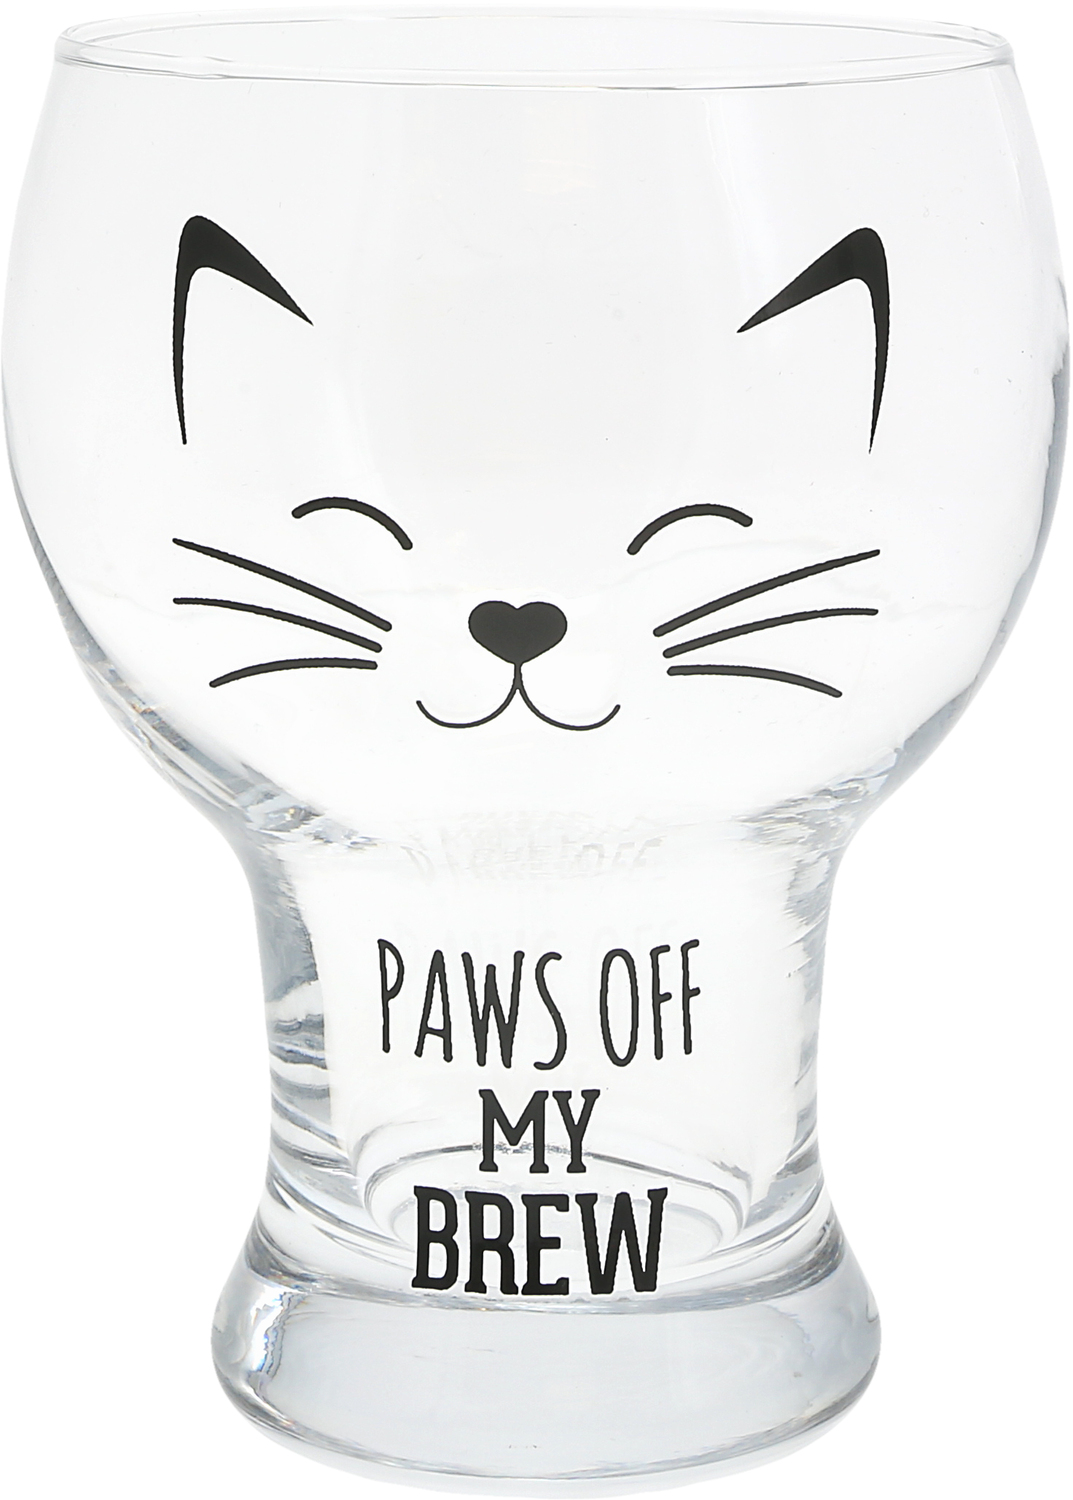 Paws Off - CAT by We Pets - Paws Off - CAT - 15 oz Pilsner Glass